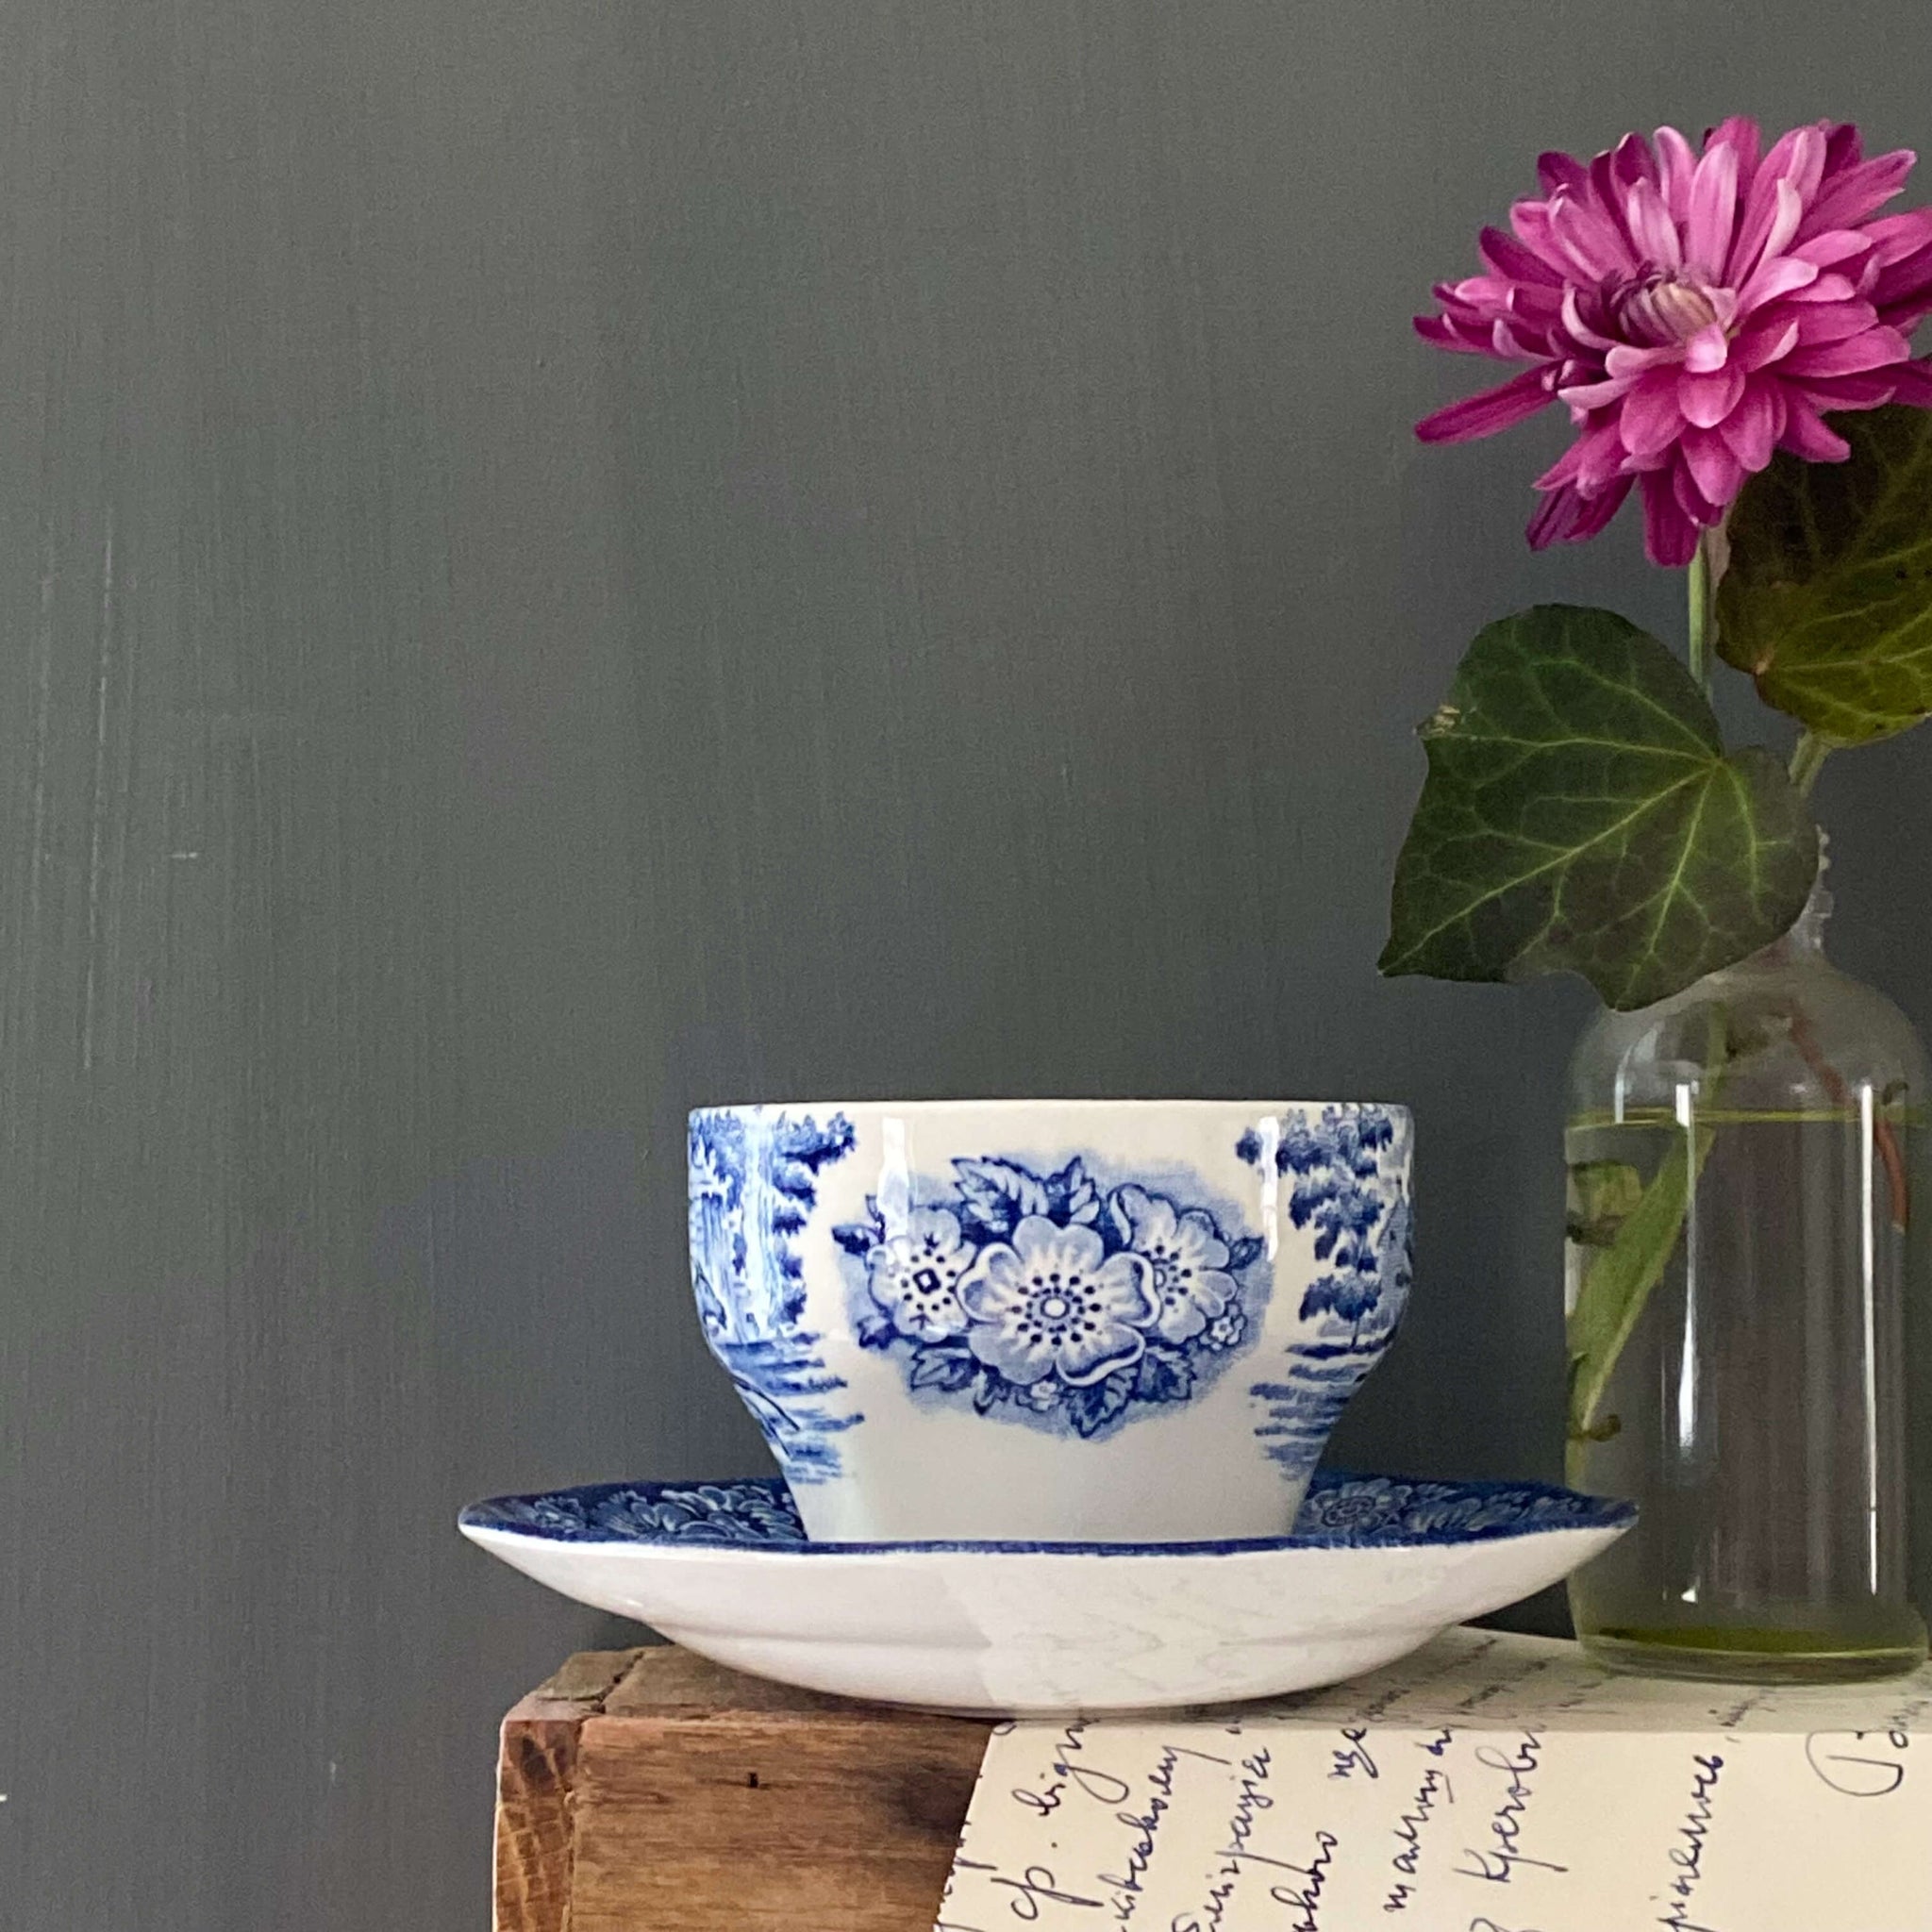 Vintage 1970s Blue & White Cup and Saucer - Liberty Blue by Enoch Wedgwood & Co Staffordshire England circa 1975-1981